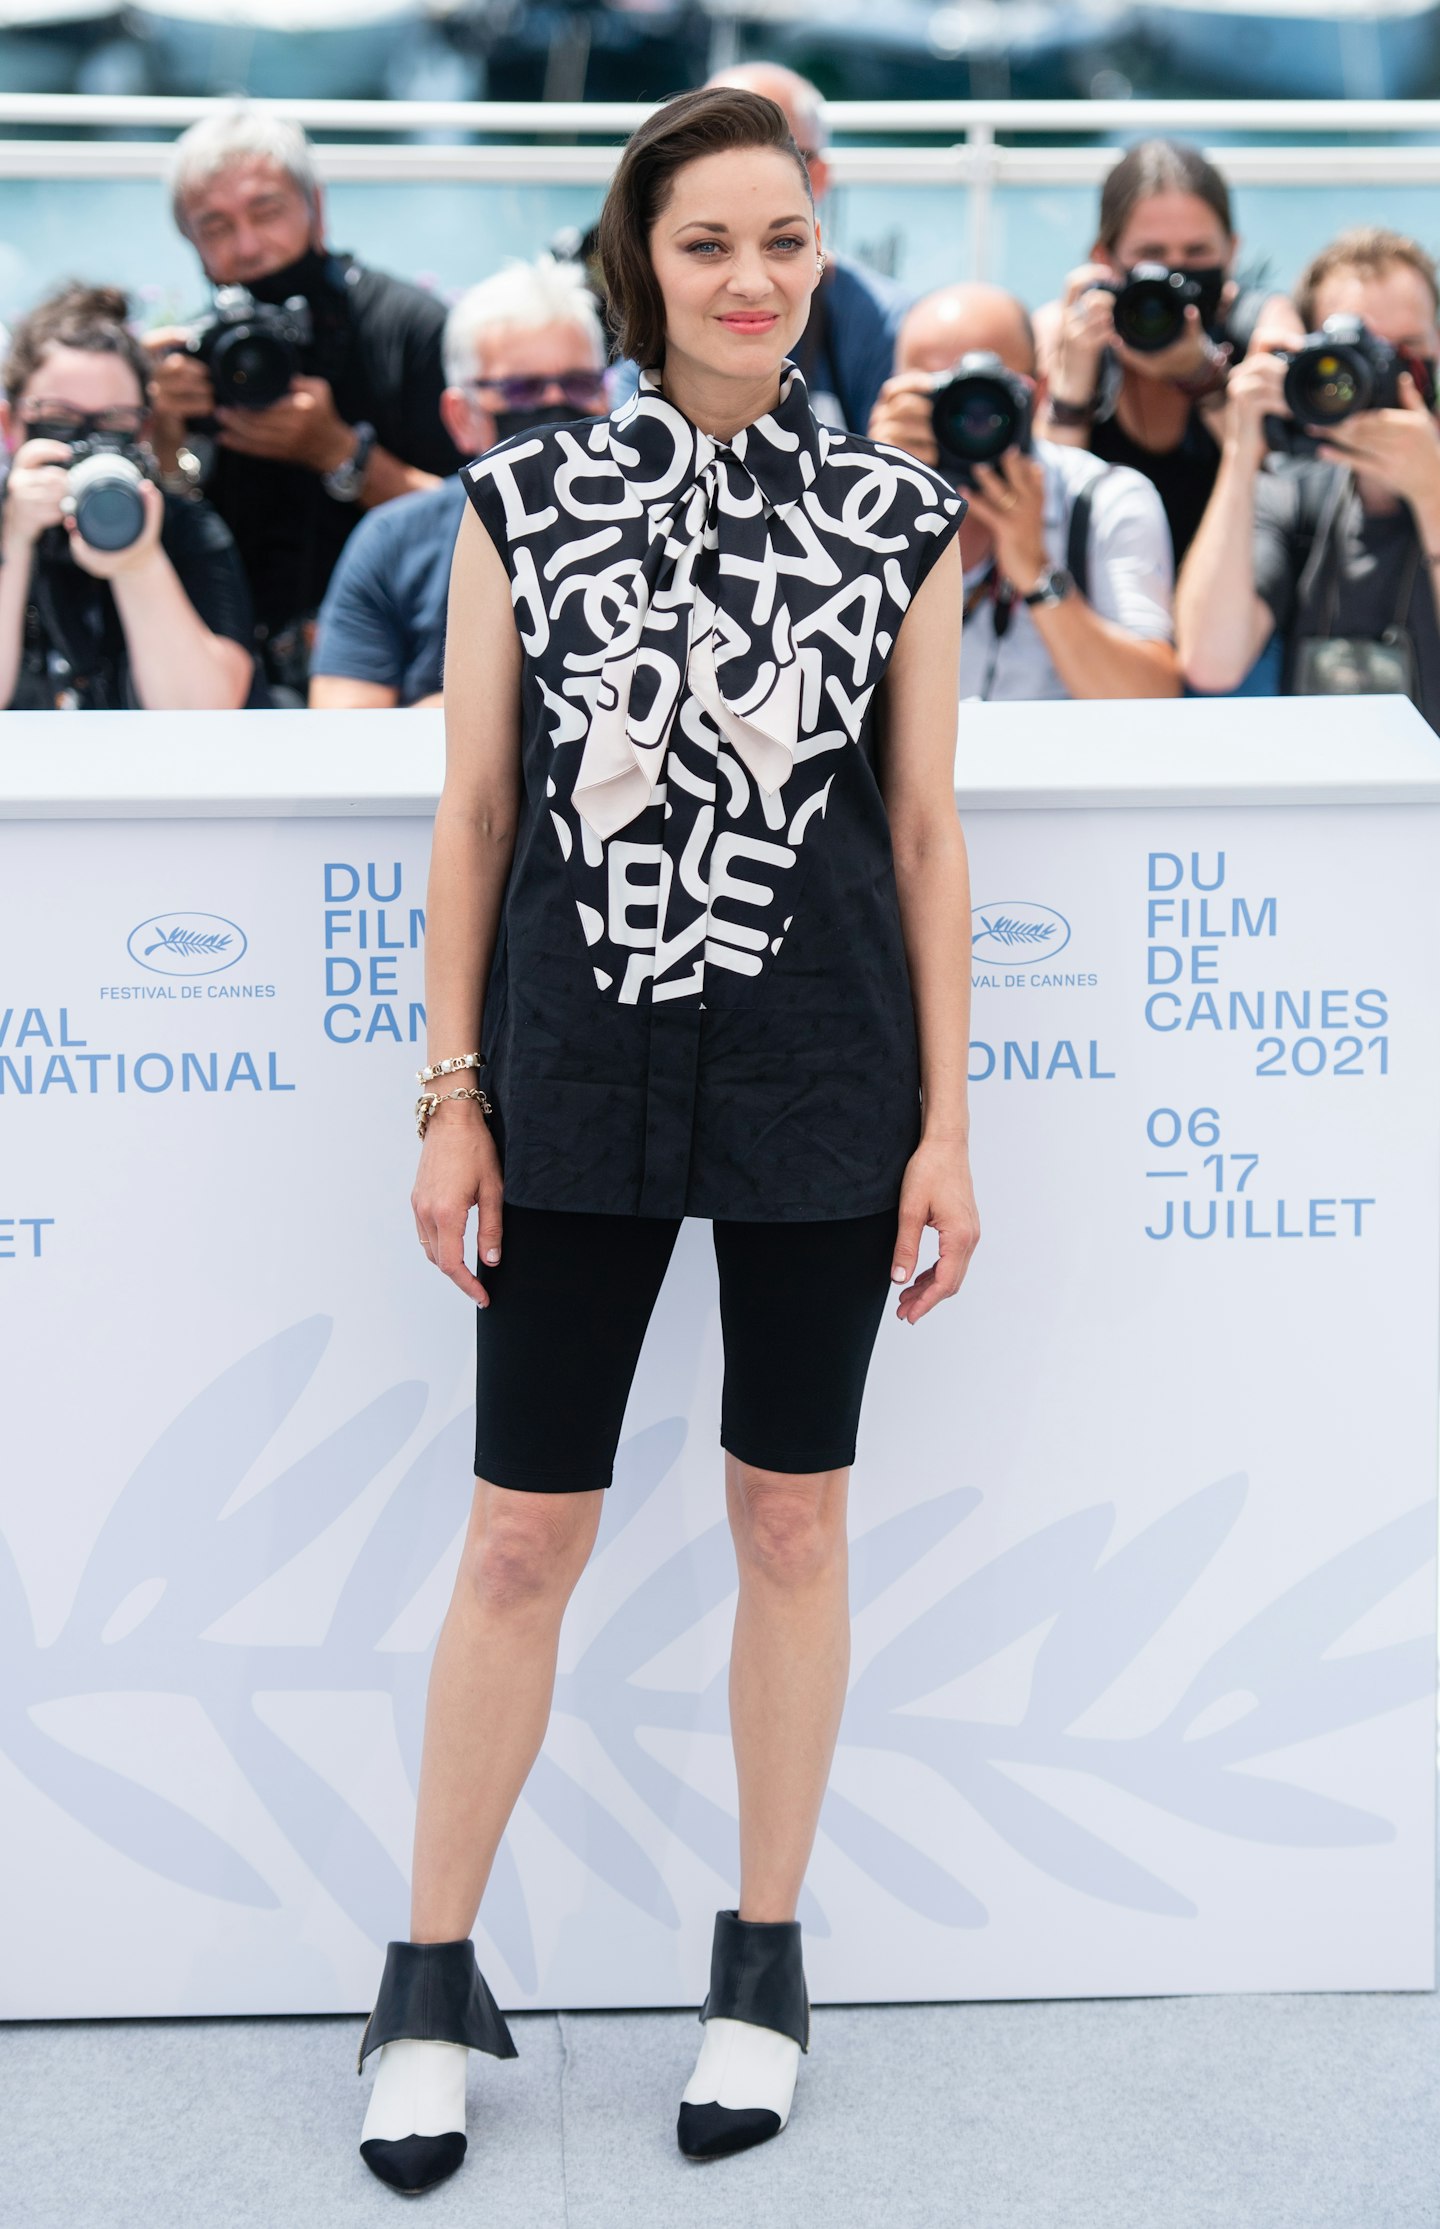 marion cotillard in chanel shorts at cannes film festival 2021